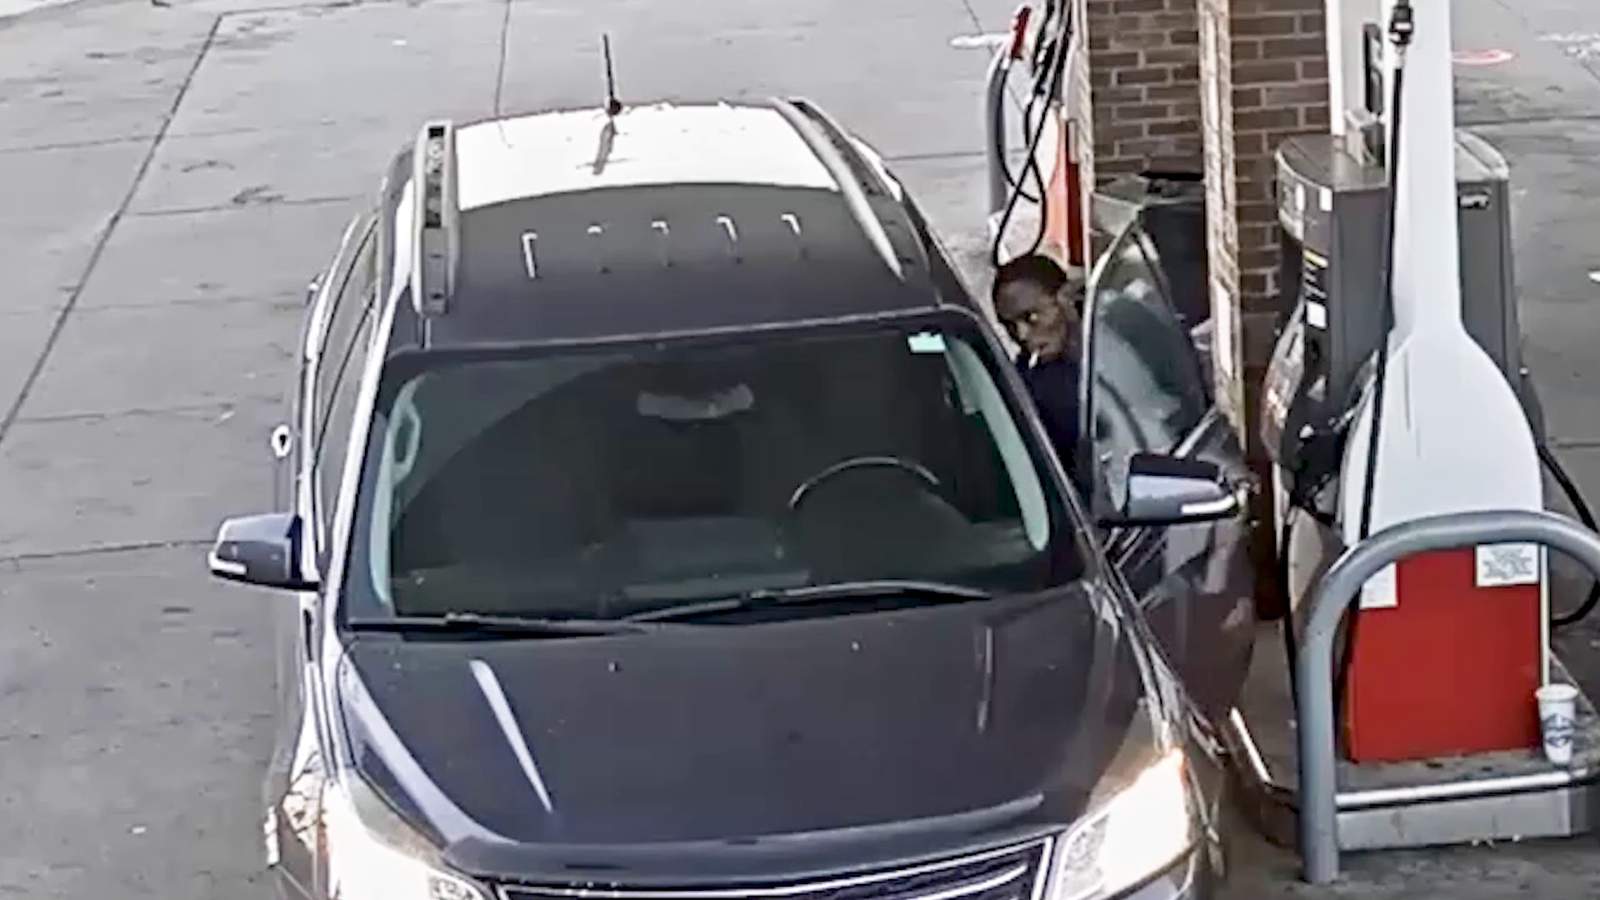 Video: Detroit police seek man wanted in connection with vehicle stolen from gas station